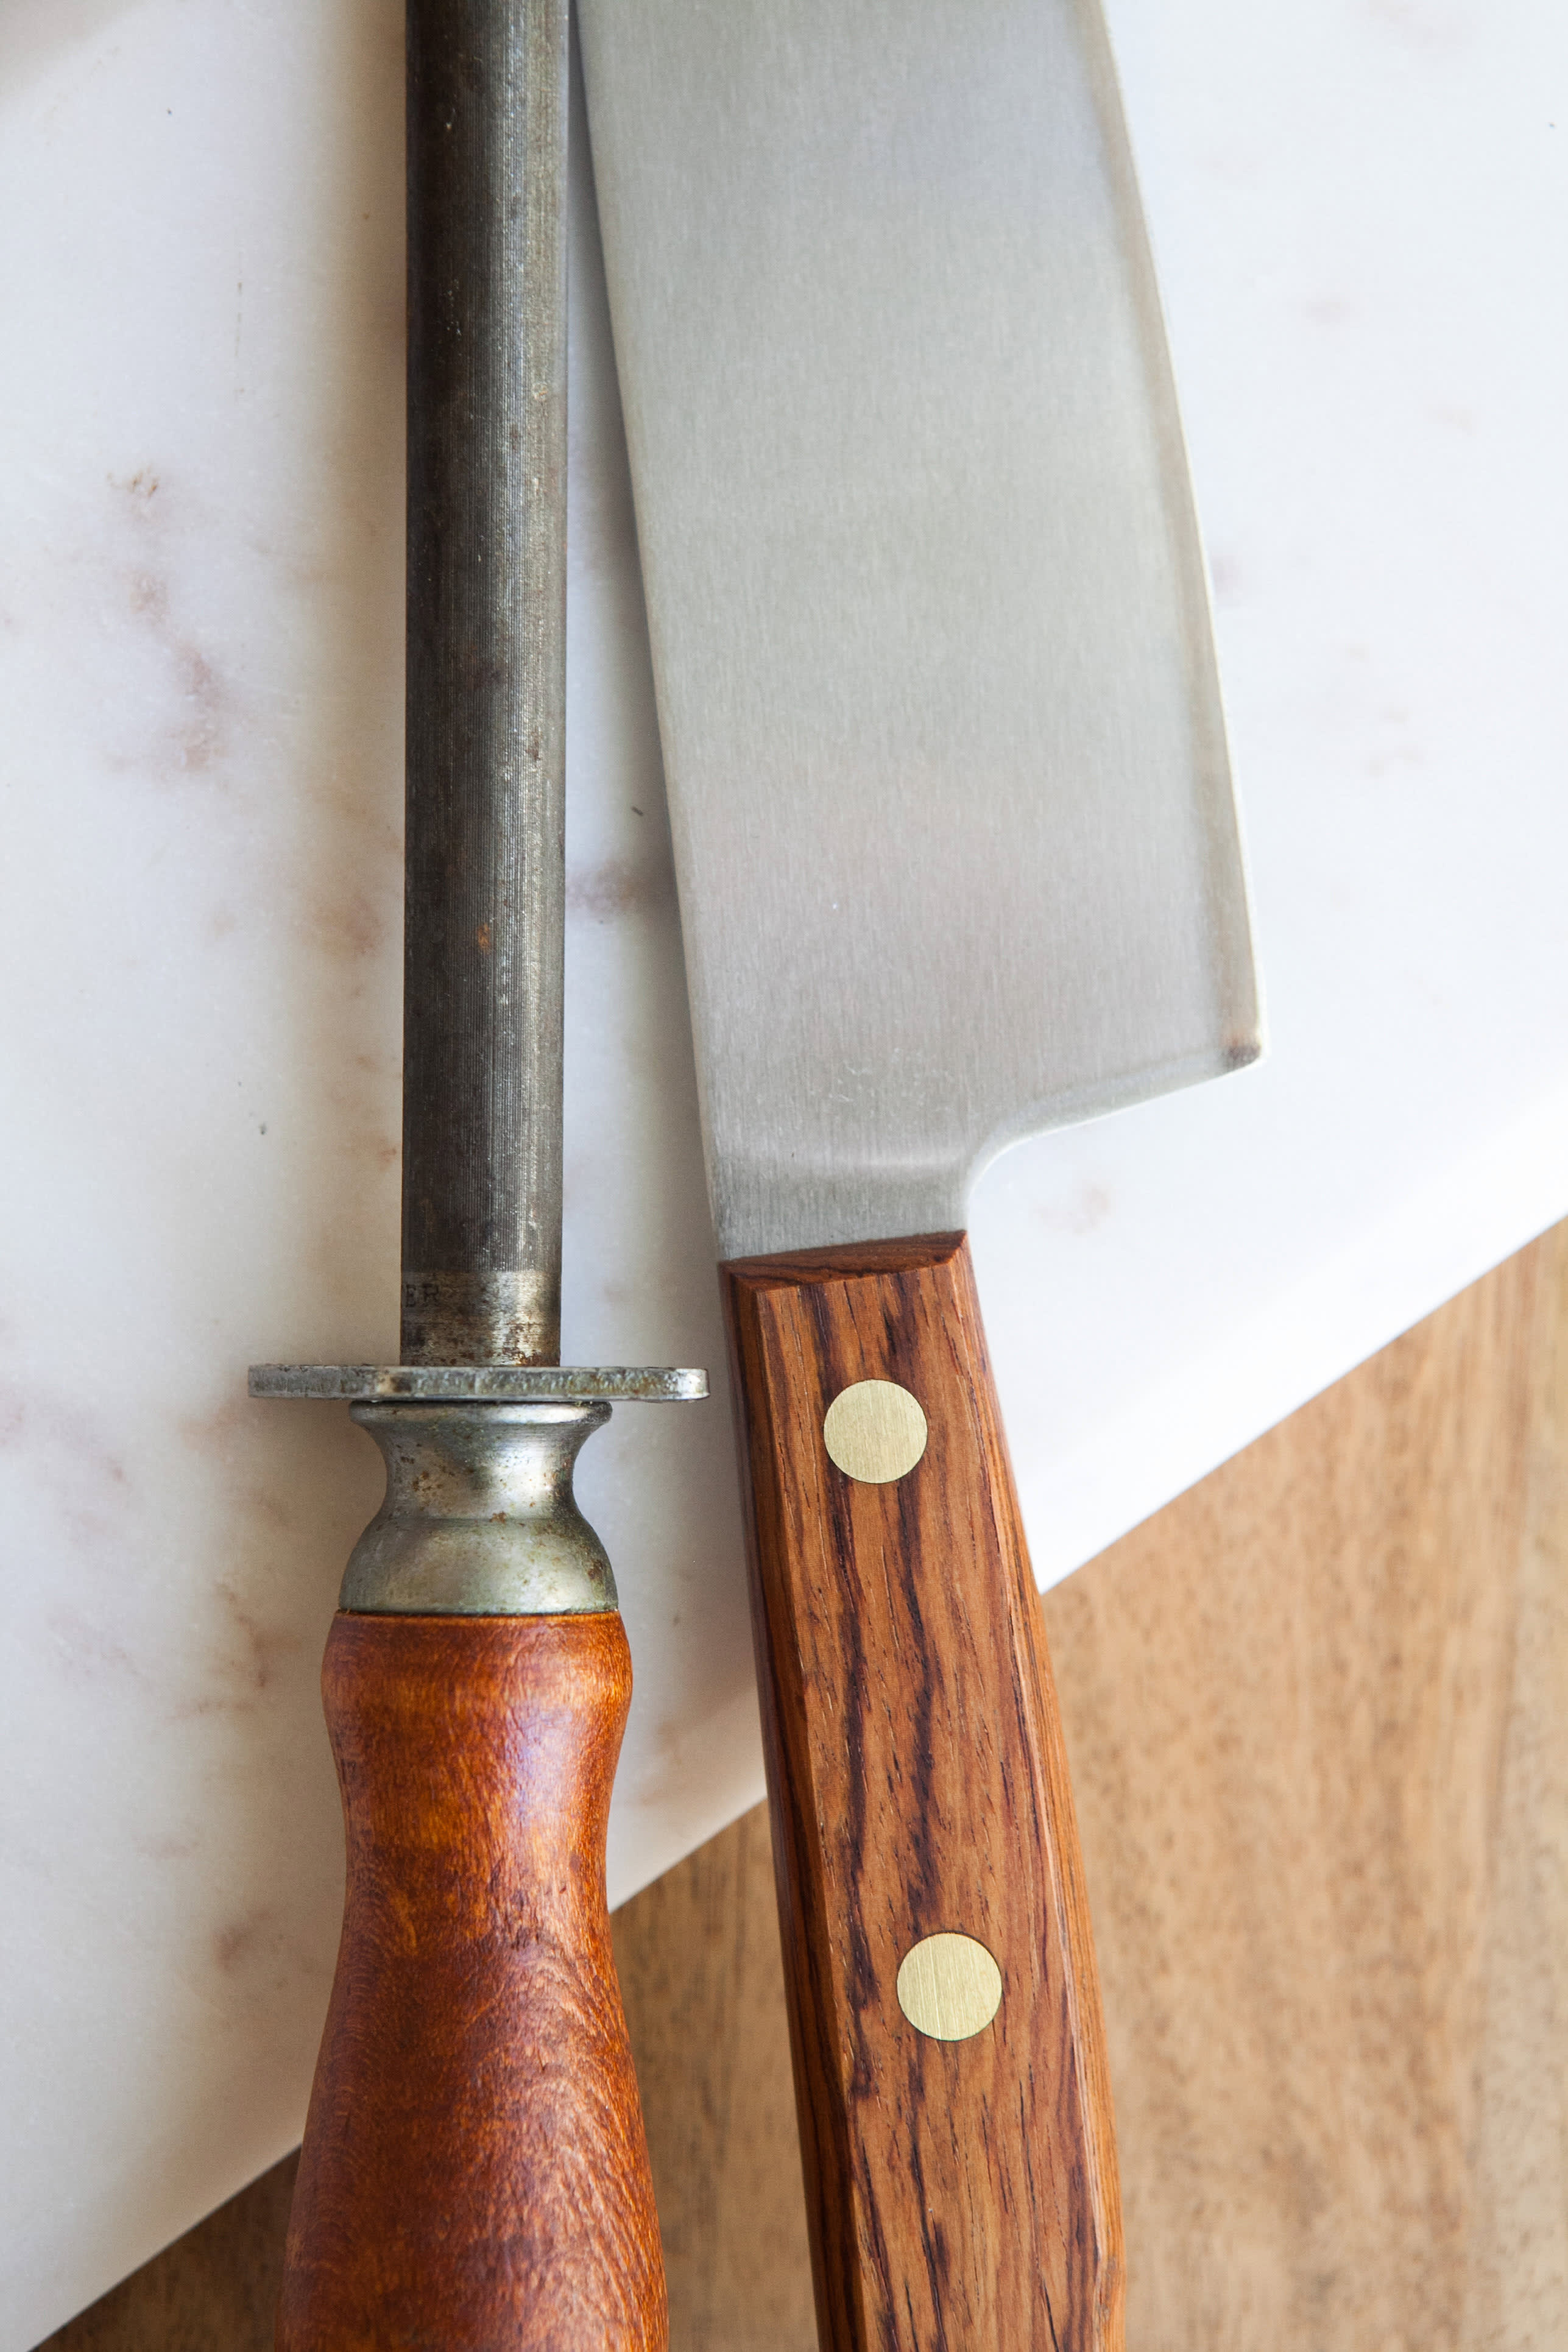 How to look after and maintain a carbon steel knife - Heinnie Haynes